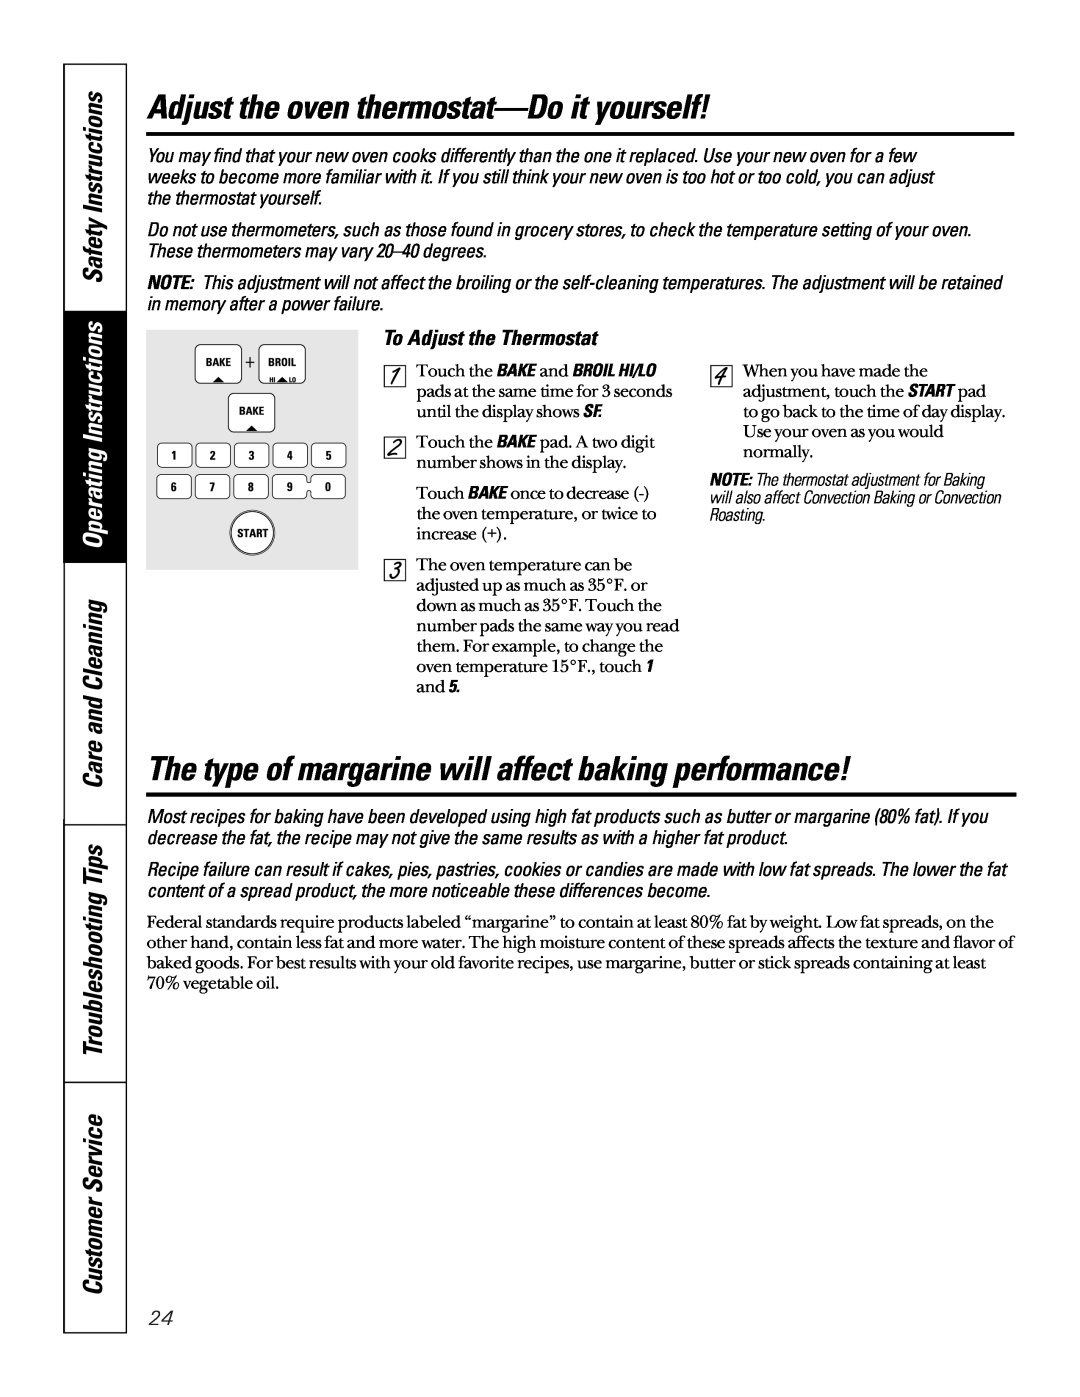 Sharp JBP85 Adjust the oven thermostat-Doit yourself, Safety Instructions, Customer Service Troubleshooting Tips Care 